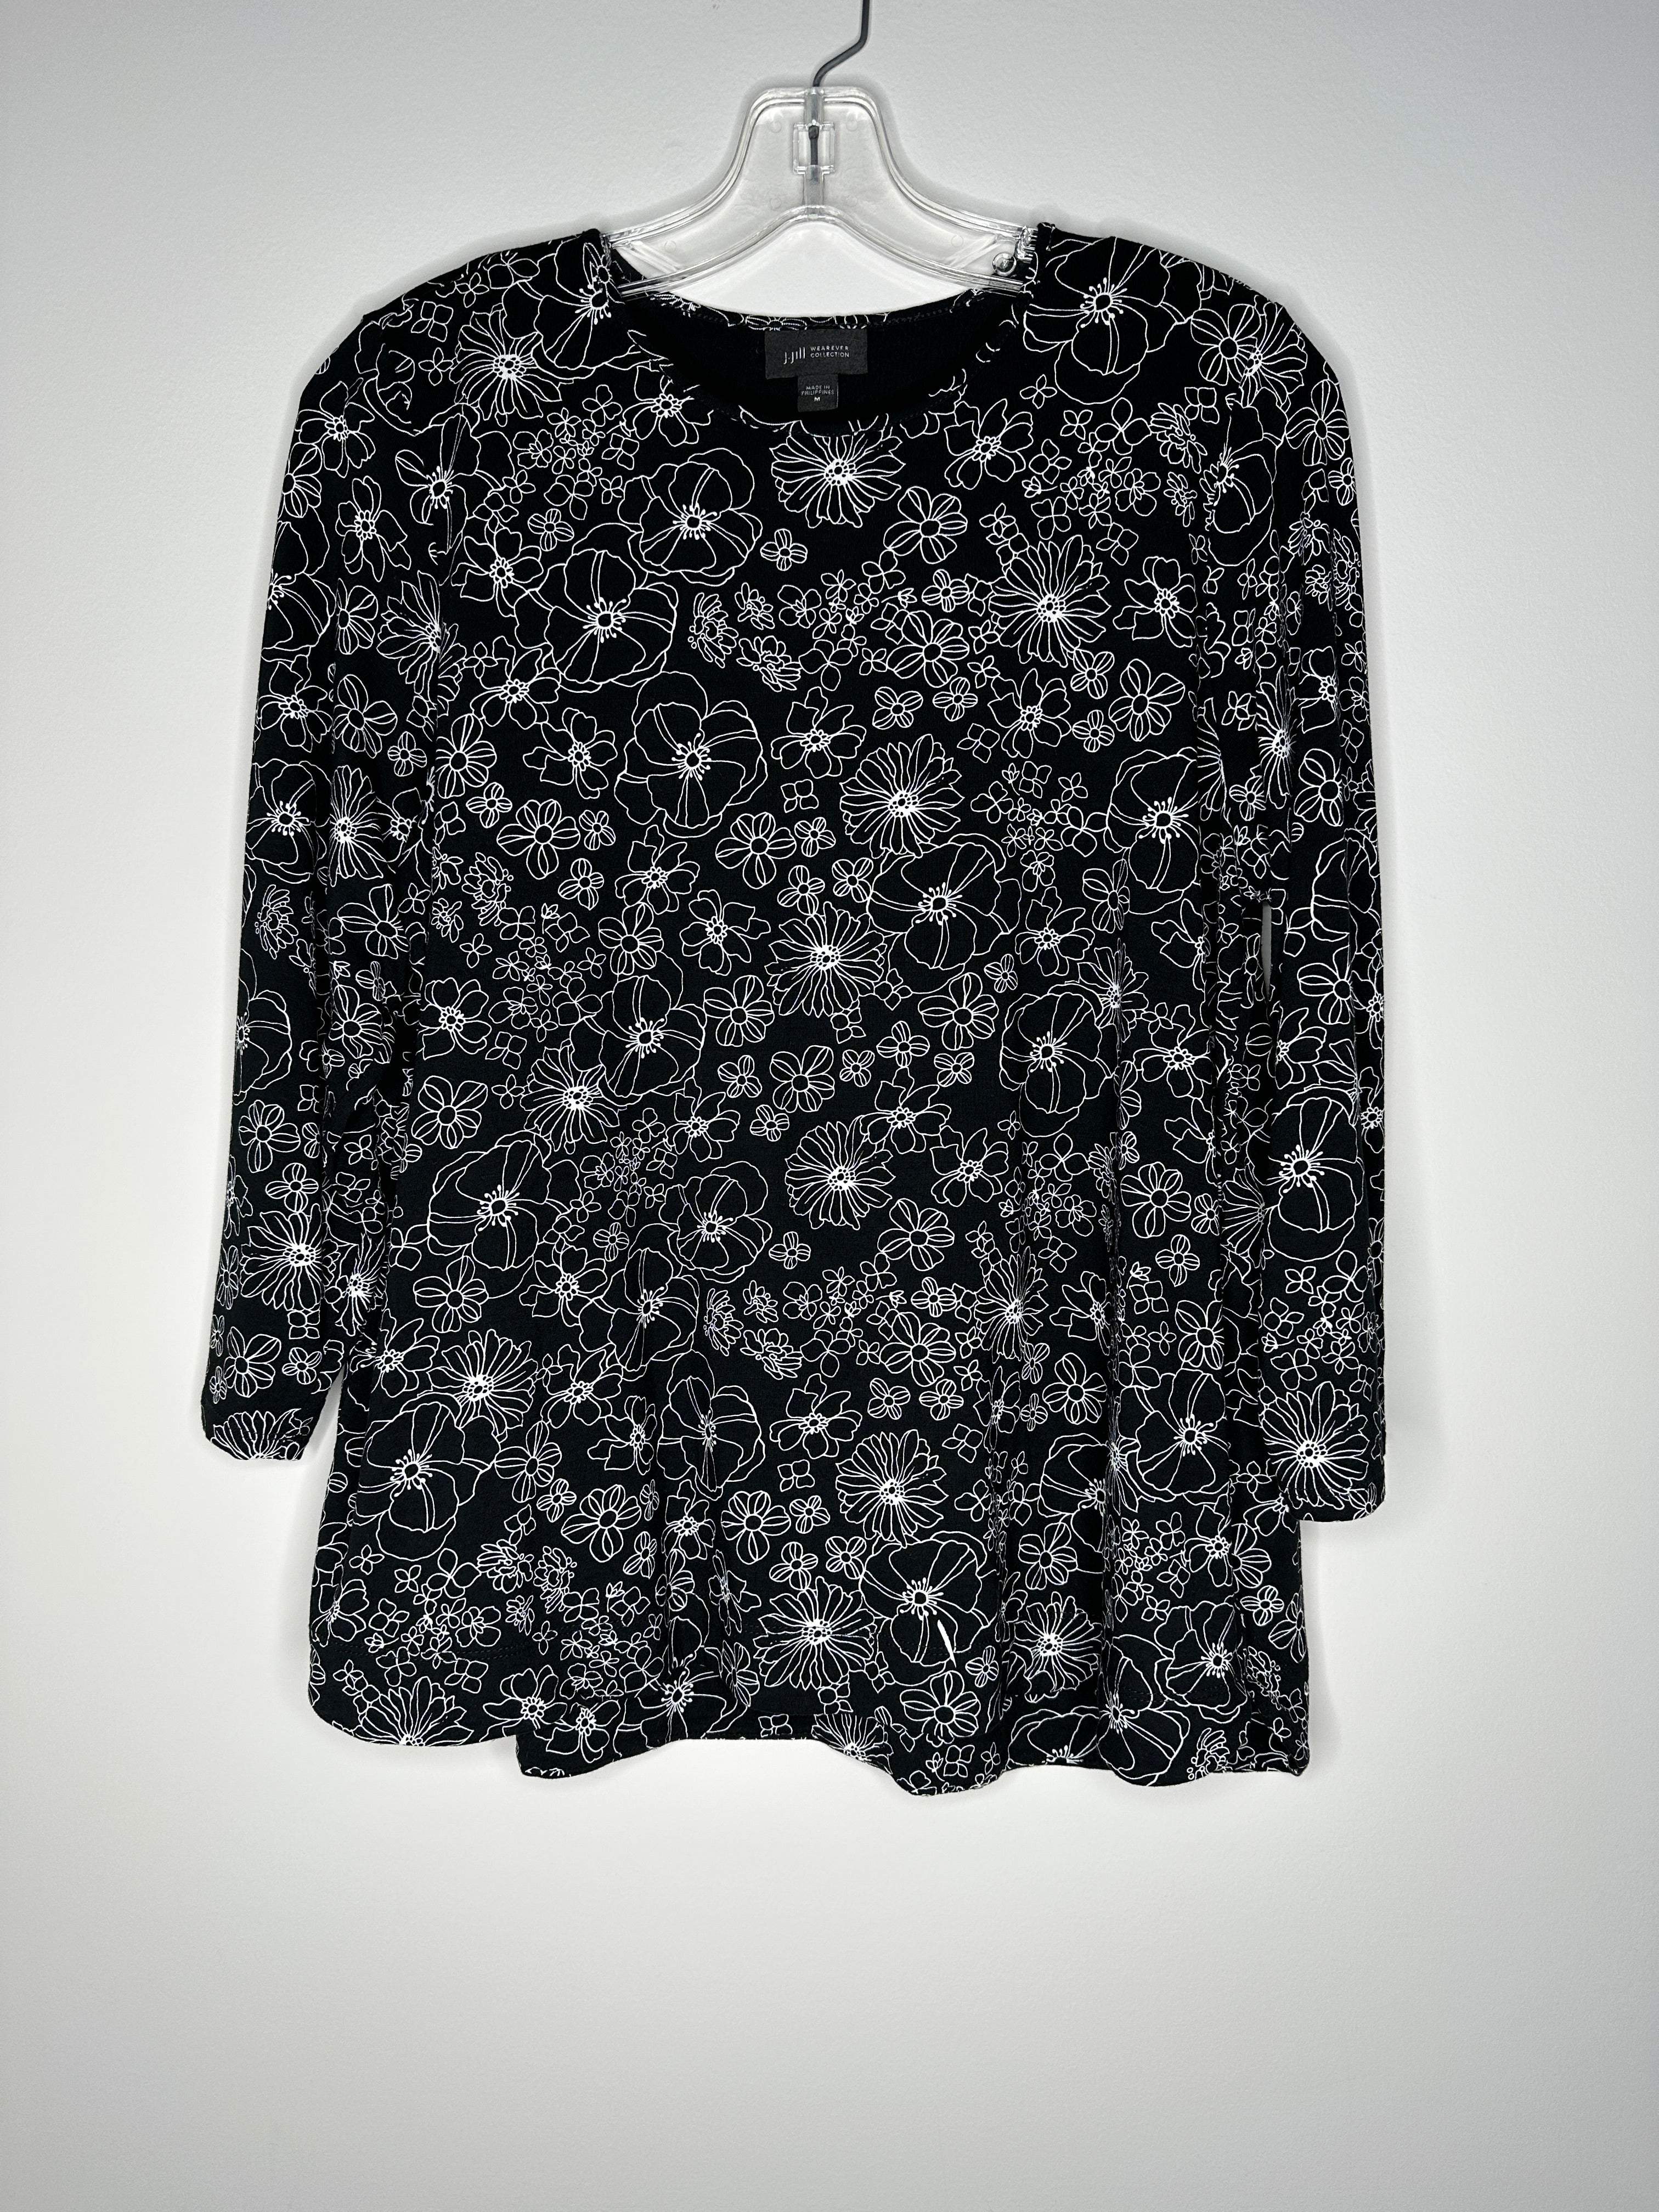 J.Jill Size M Black w/White Flowers 3/4 Sleeve Wearever Collection Top –  The Sequel Shop